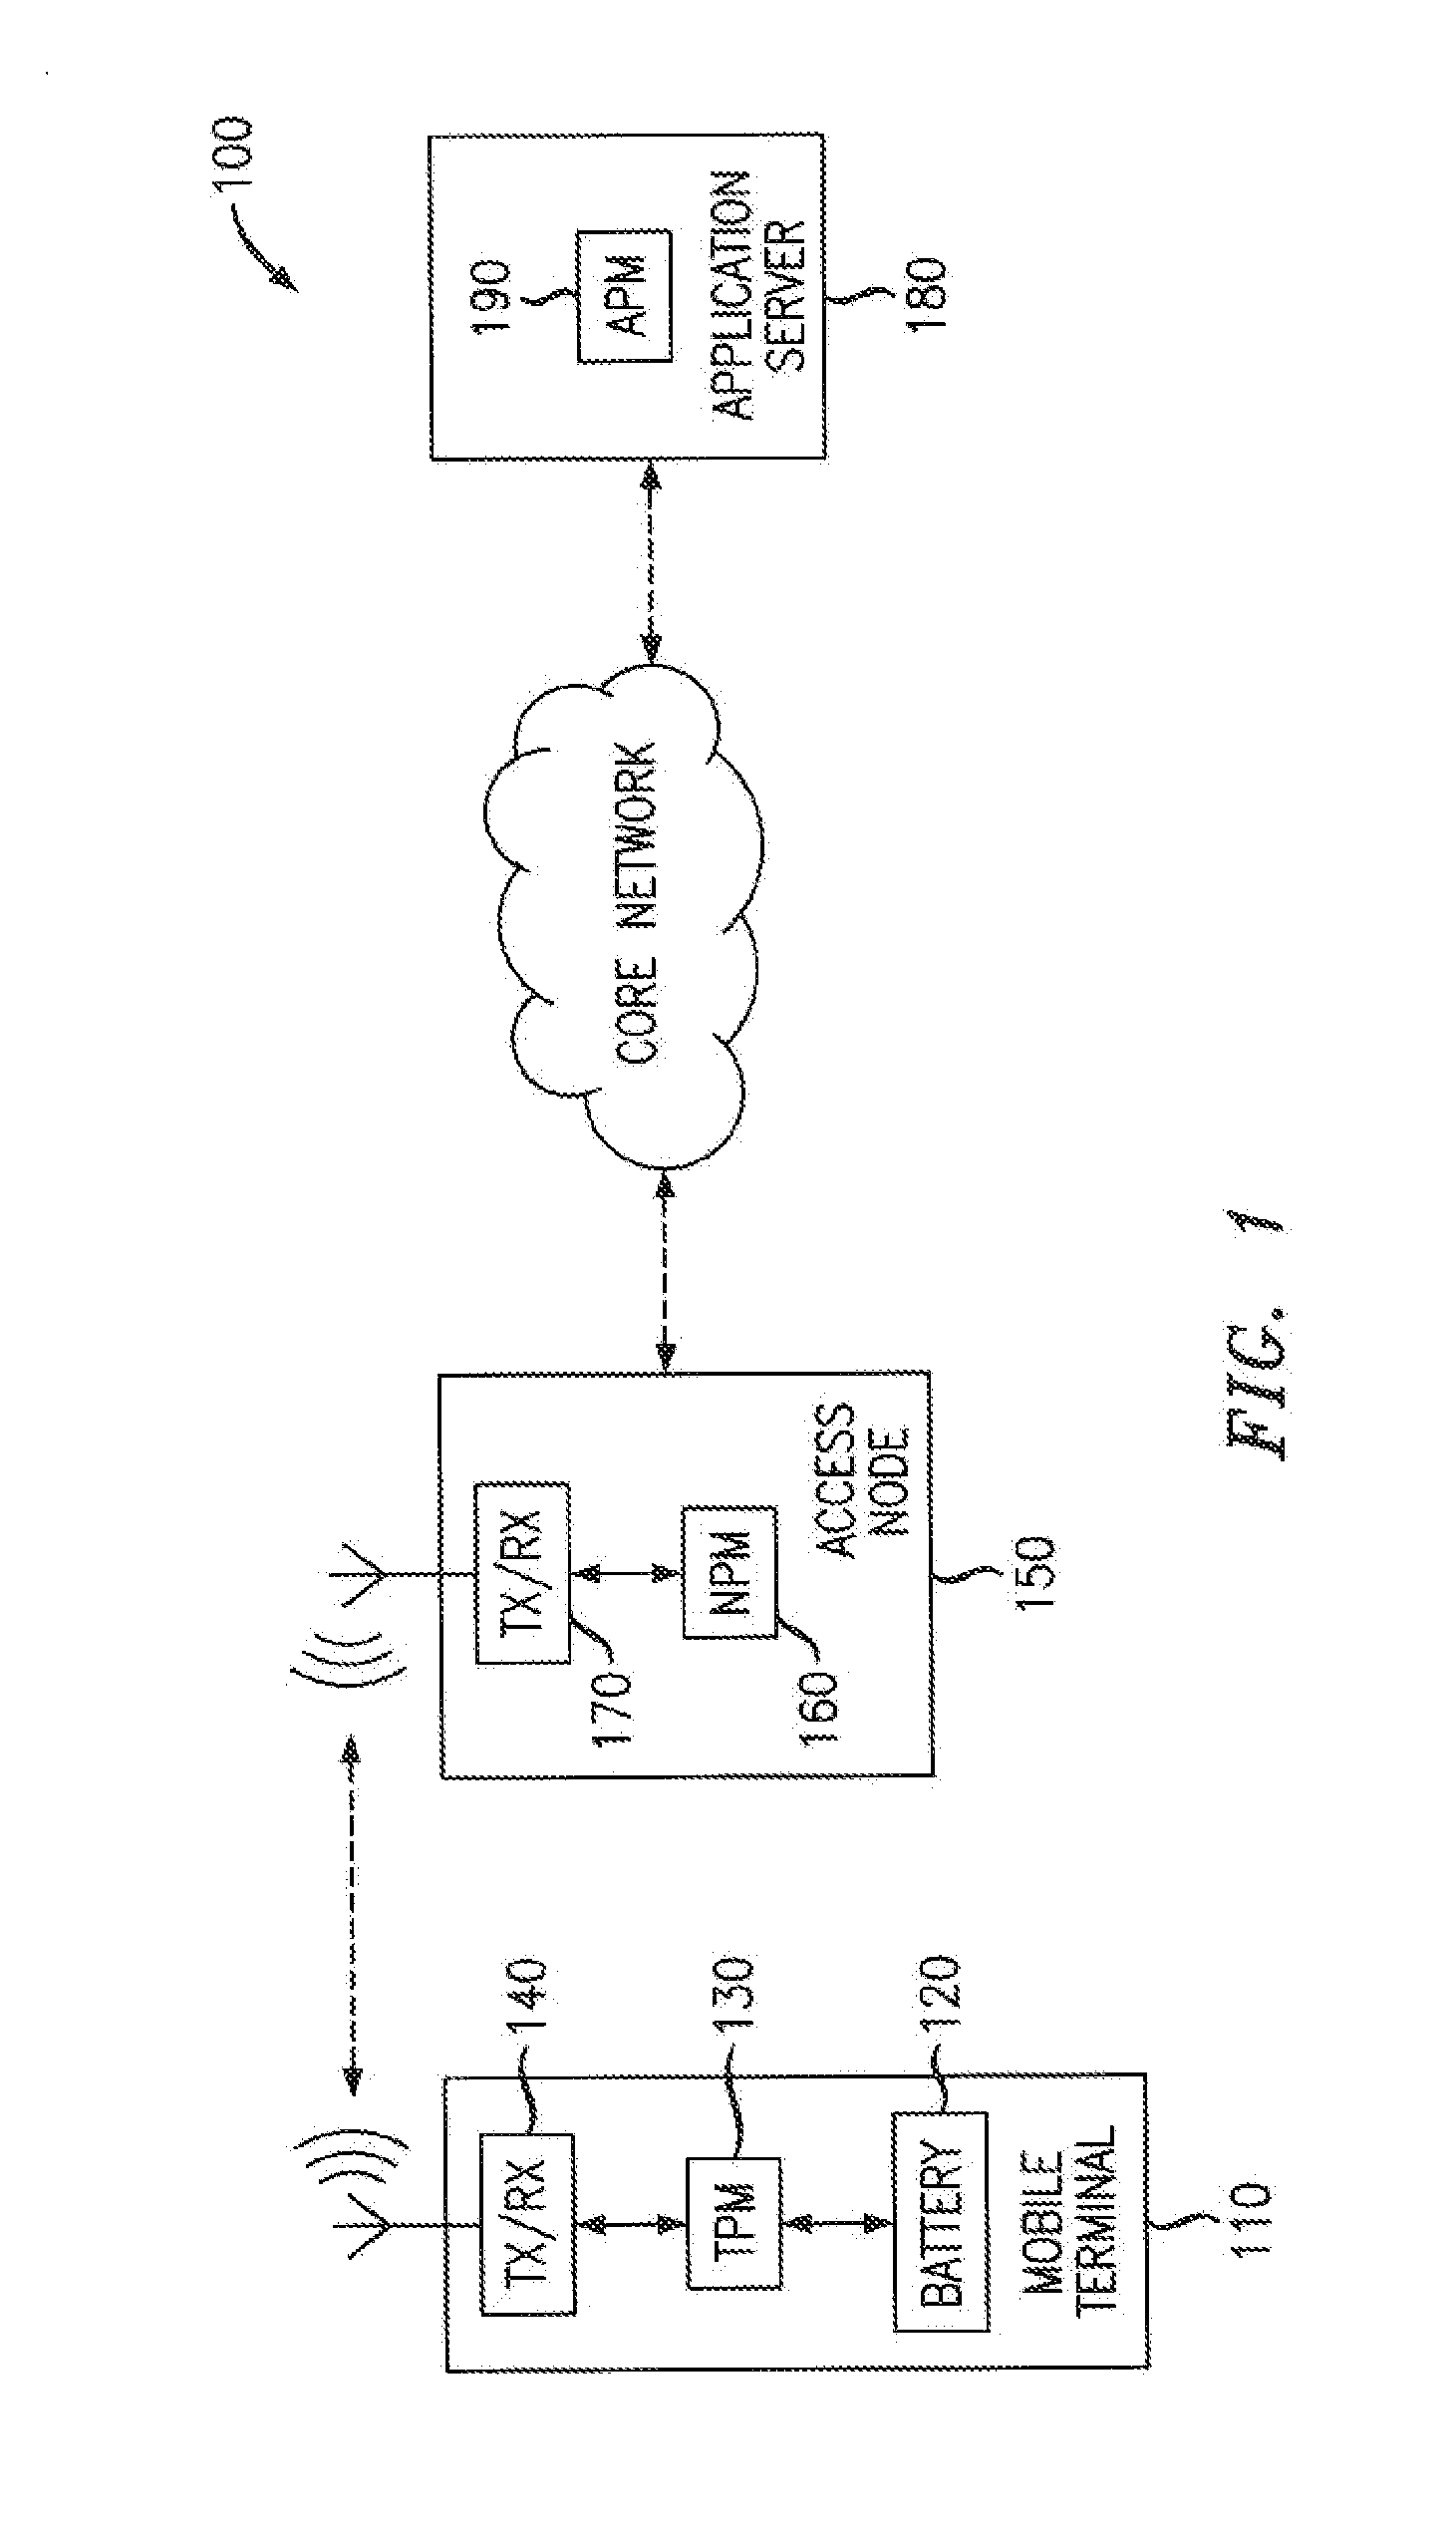 Method And Apparatus Of Smart Power Management For Mobile Communication Terminals